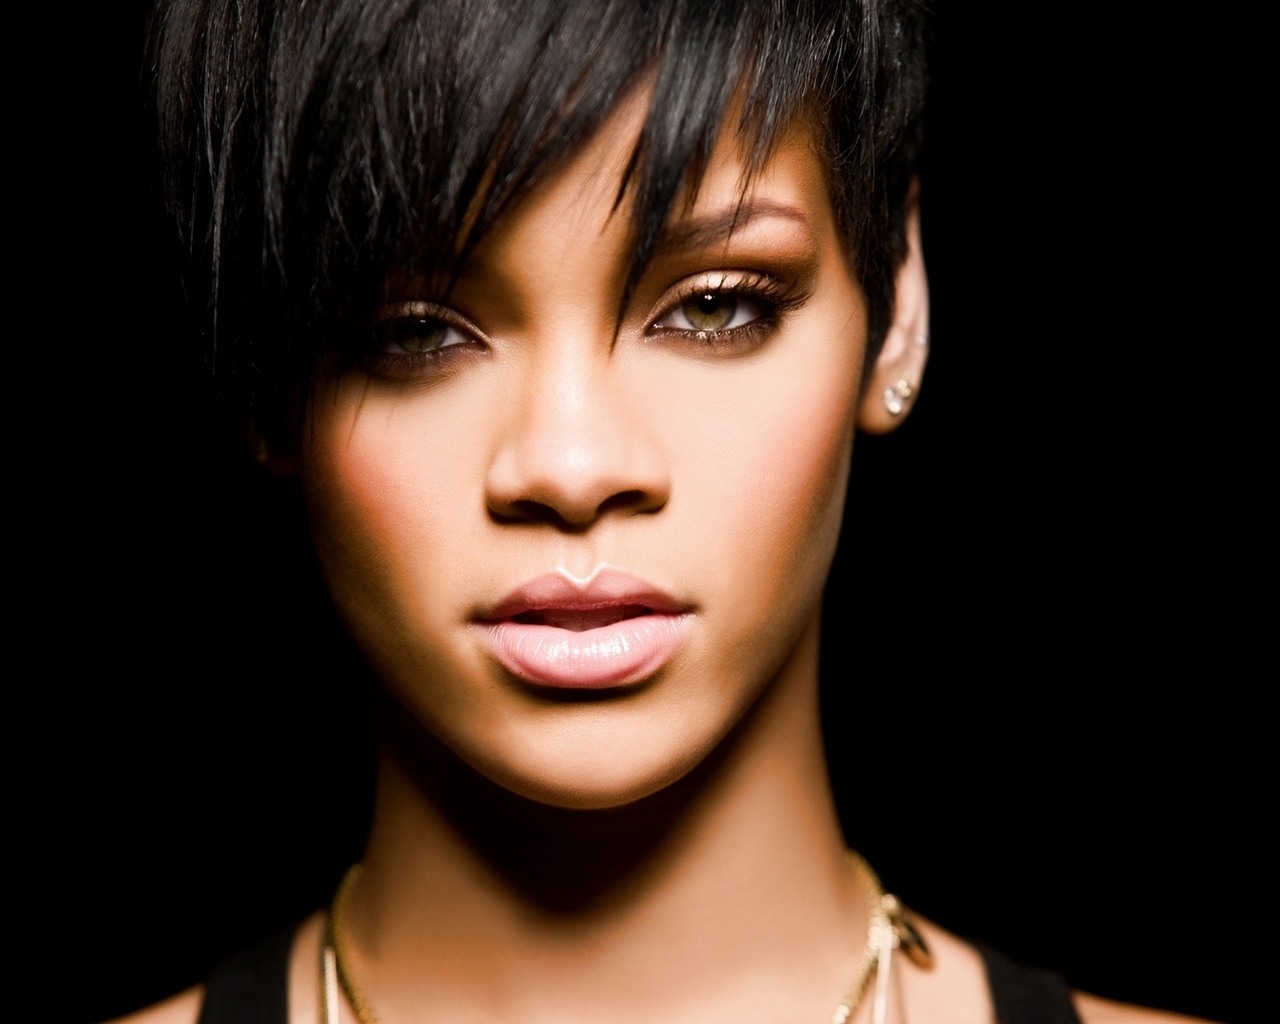 Gorgeous Rihanna for 1280 x 1024 resolution